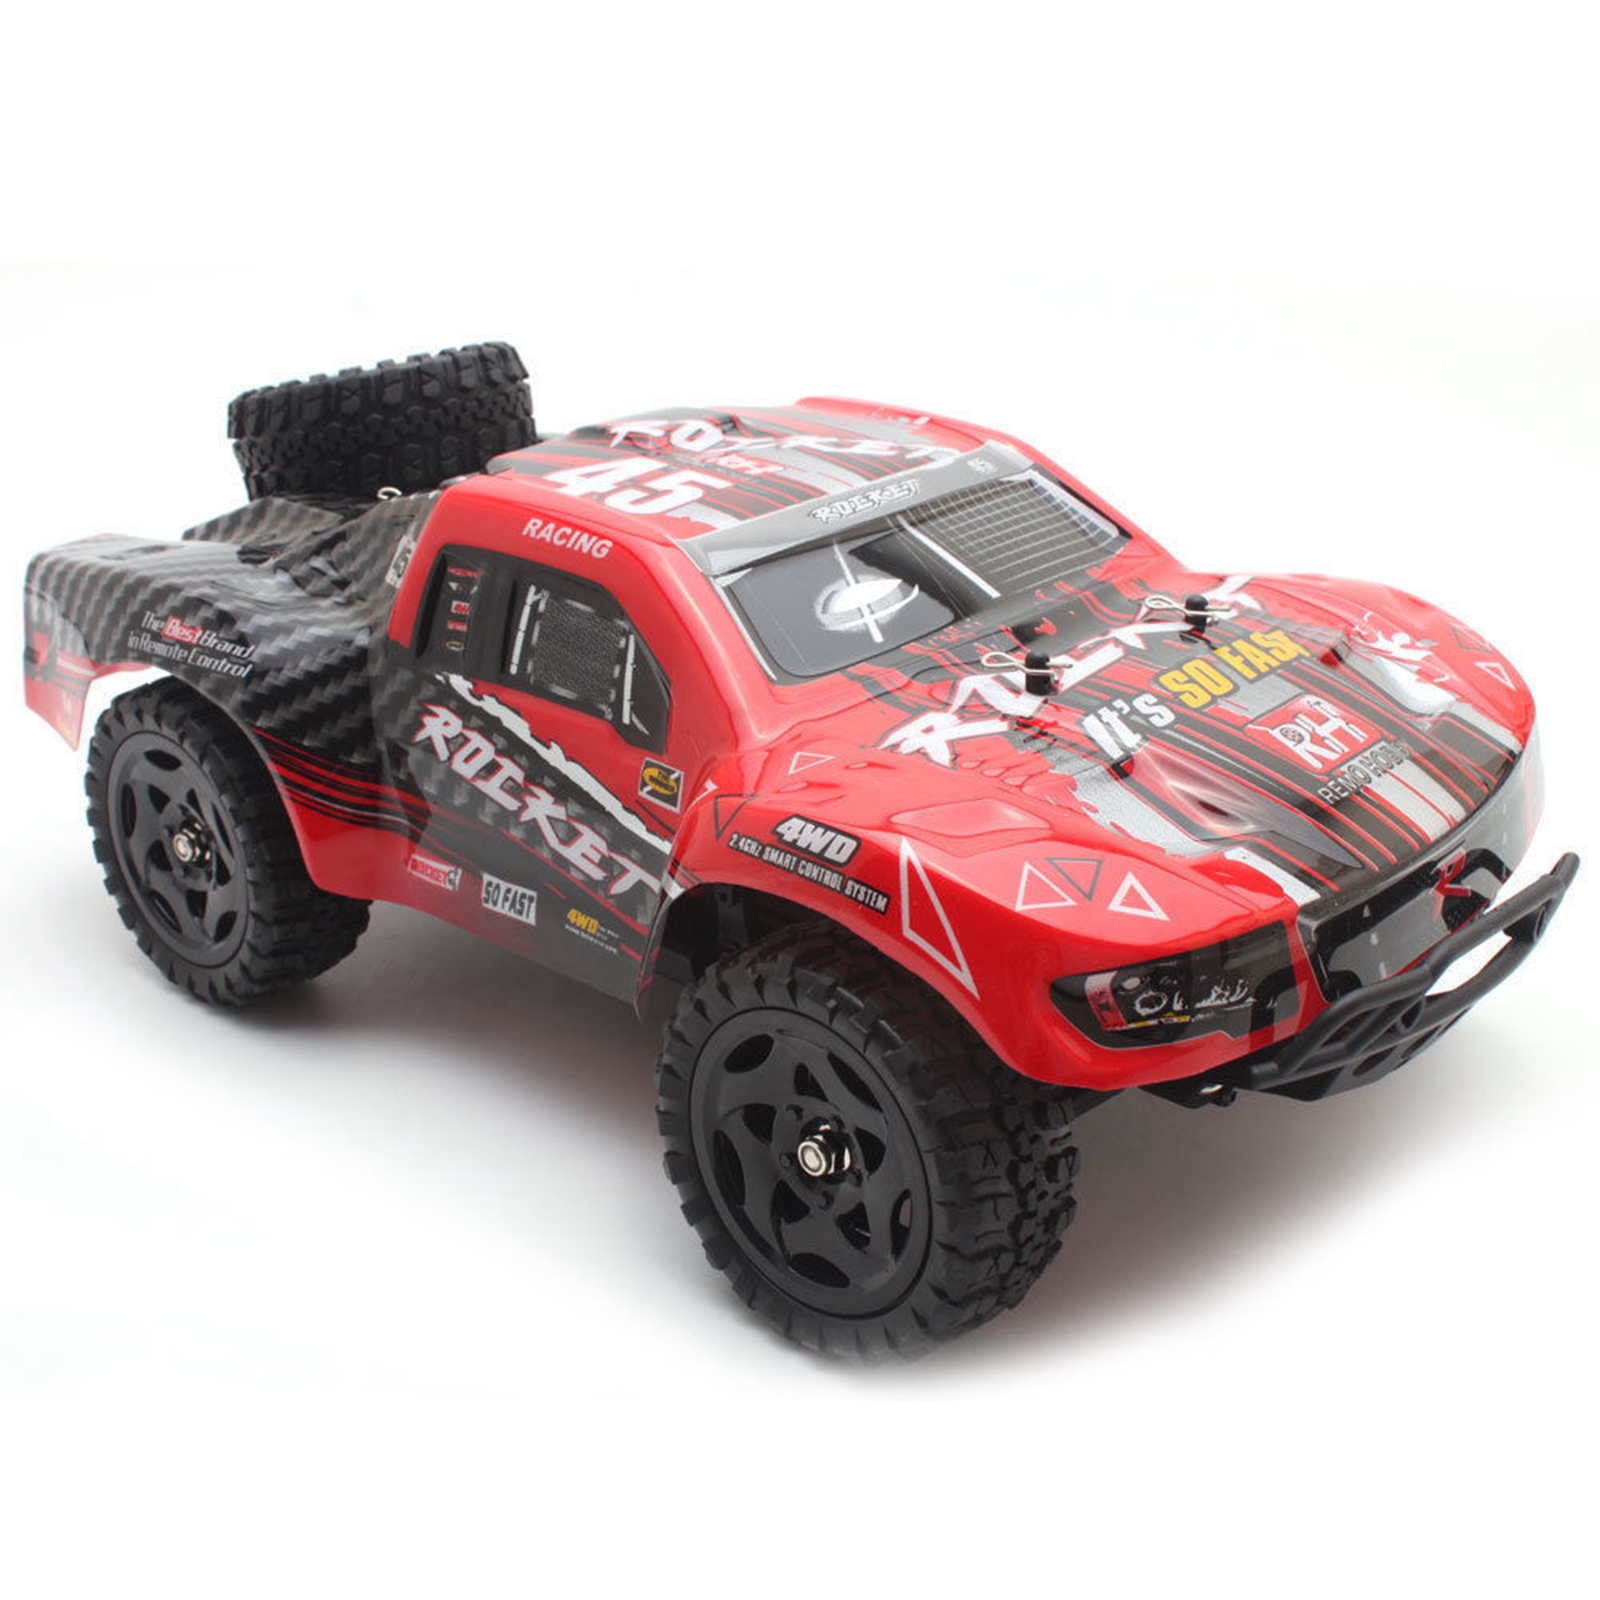 REMO 1621 2.4G 4WD 1/16 50km/h RC Truck Car Waterproof Brushed Short Course - image 2 of 7